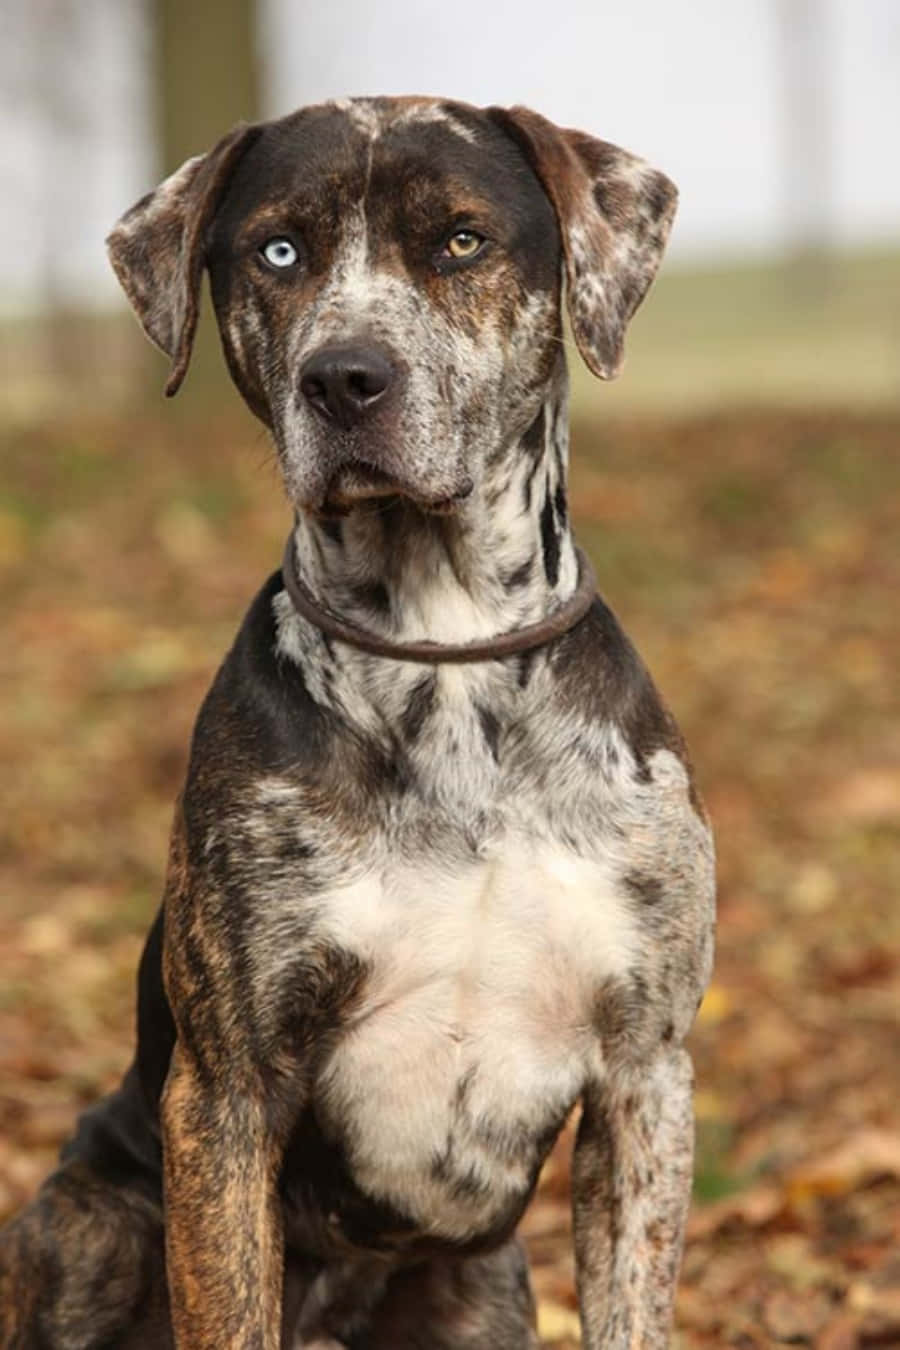 "The Loyal and Affectionate Catahoula Dog"